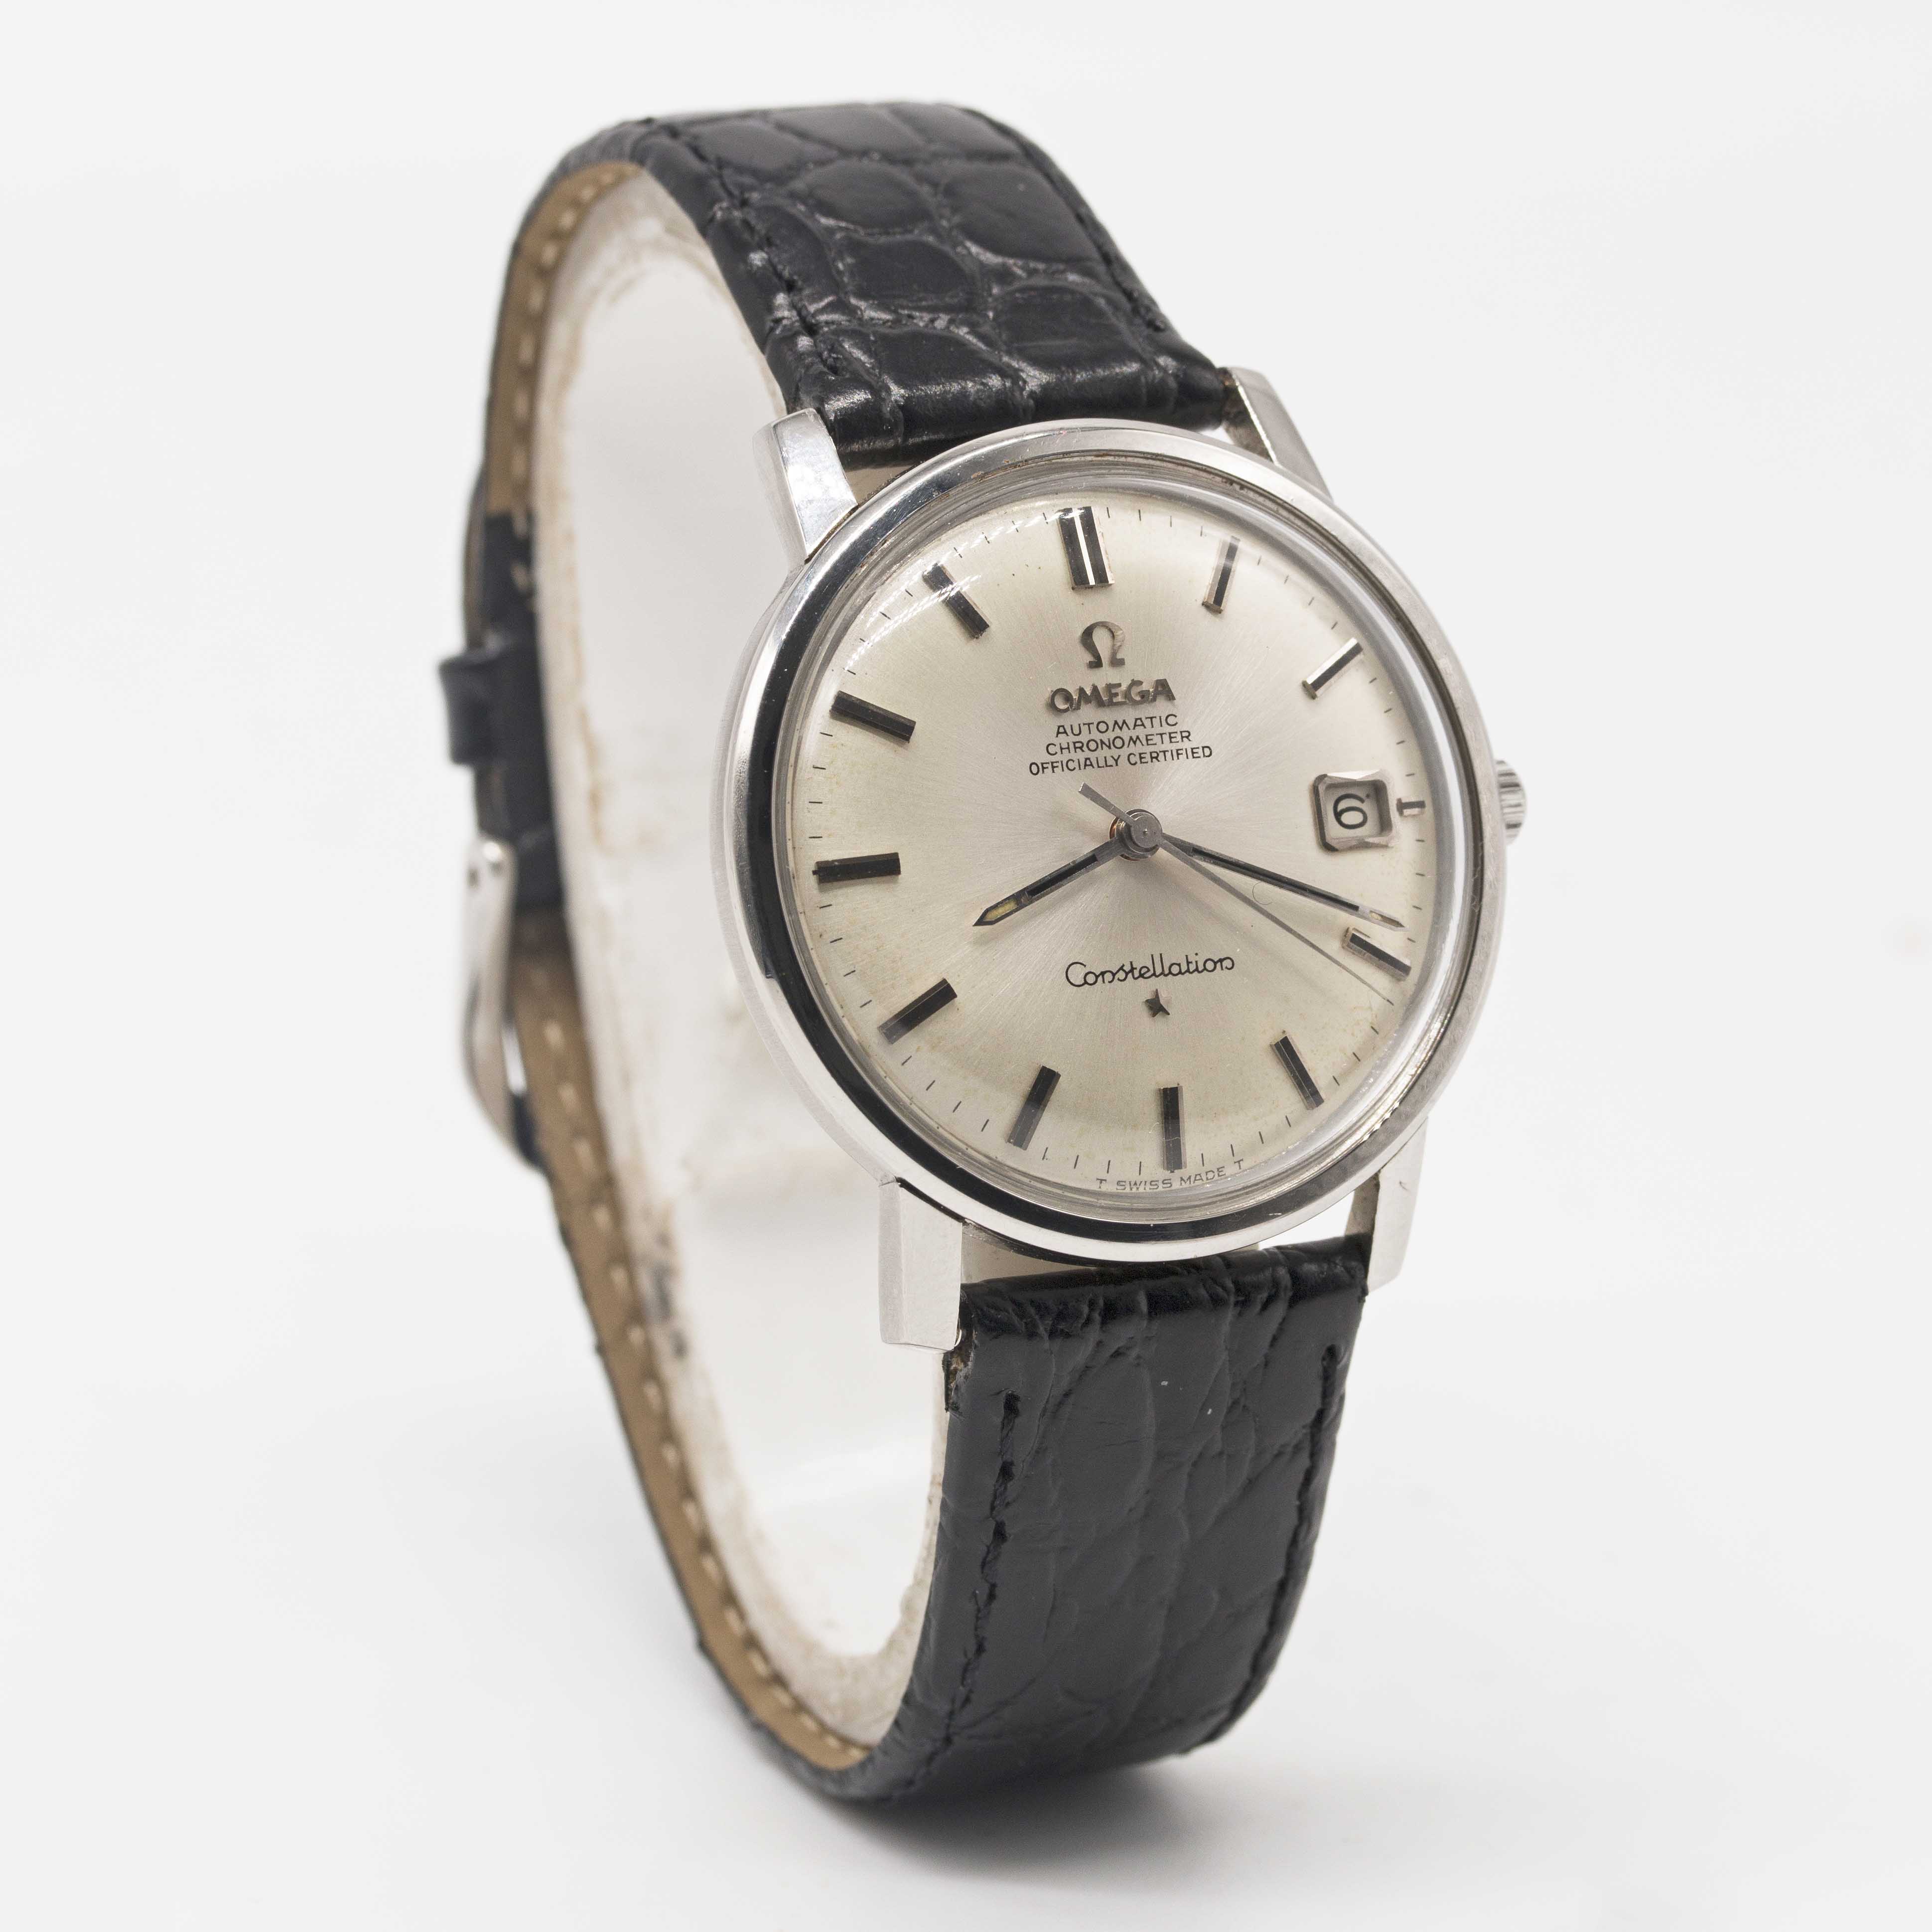 A GENTLEMAN'S STAINLESS STEEL OMEGA CONSTELLATION AUTOMATIC CHRONOMETER WRIST WATCH CIRCA 1967, REF. - Image 4 of 6